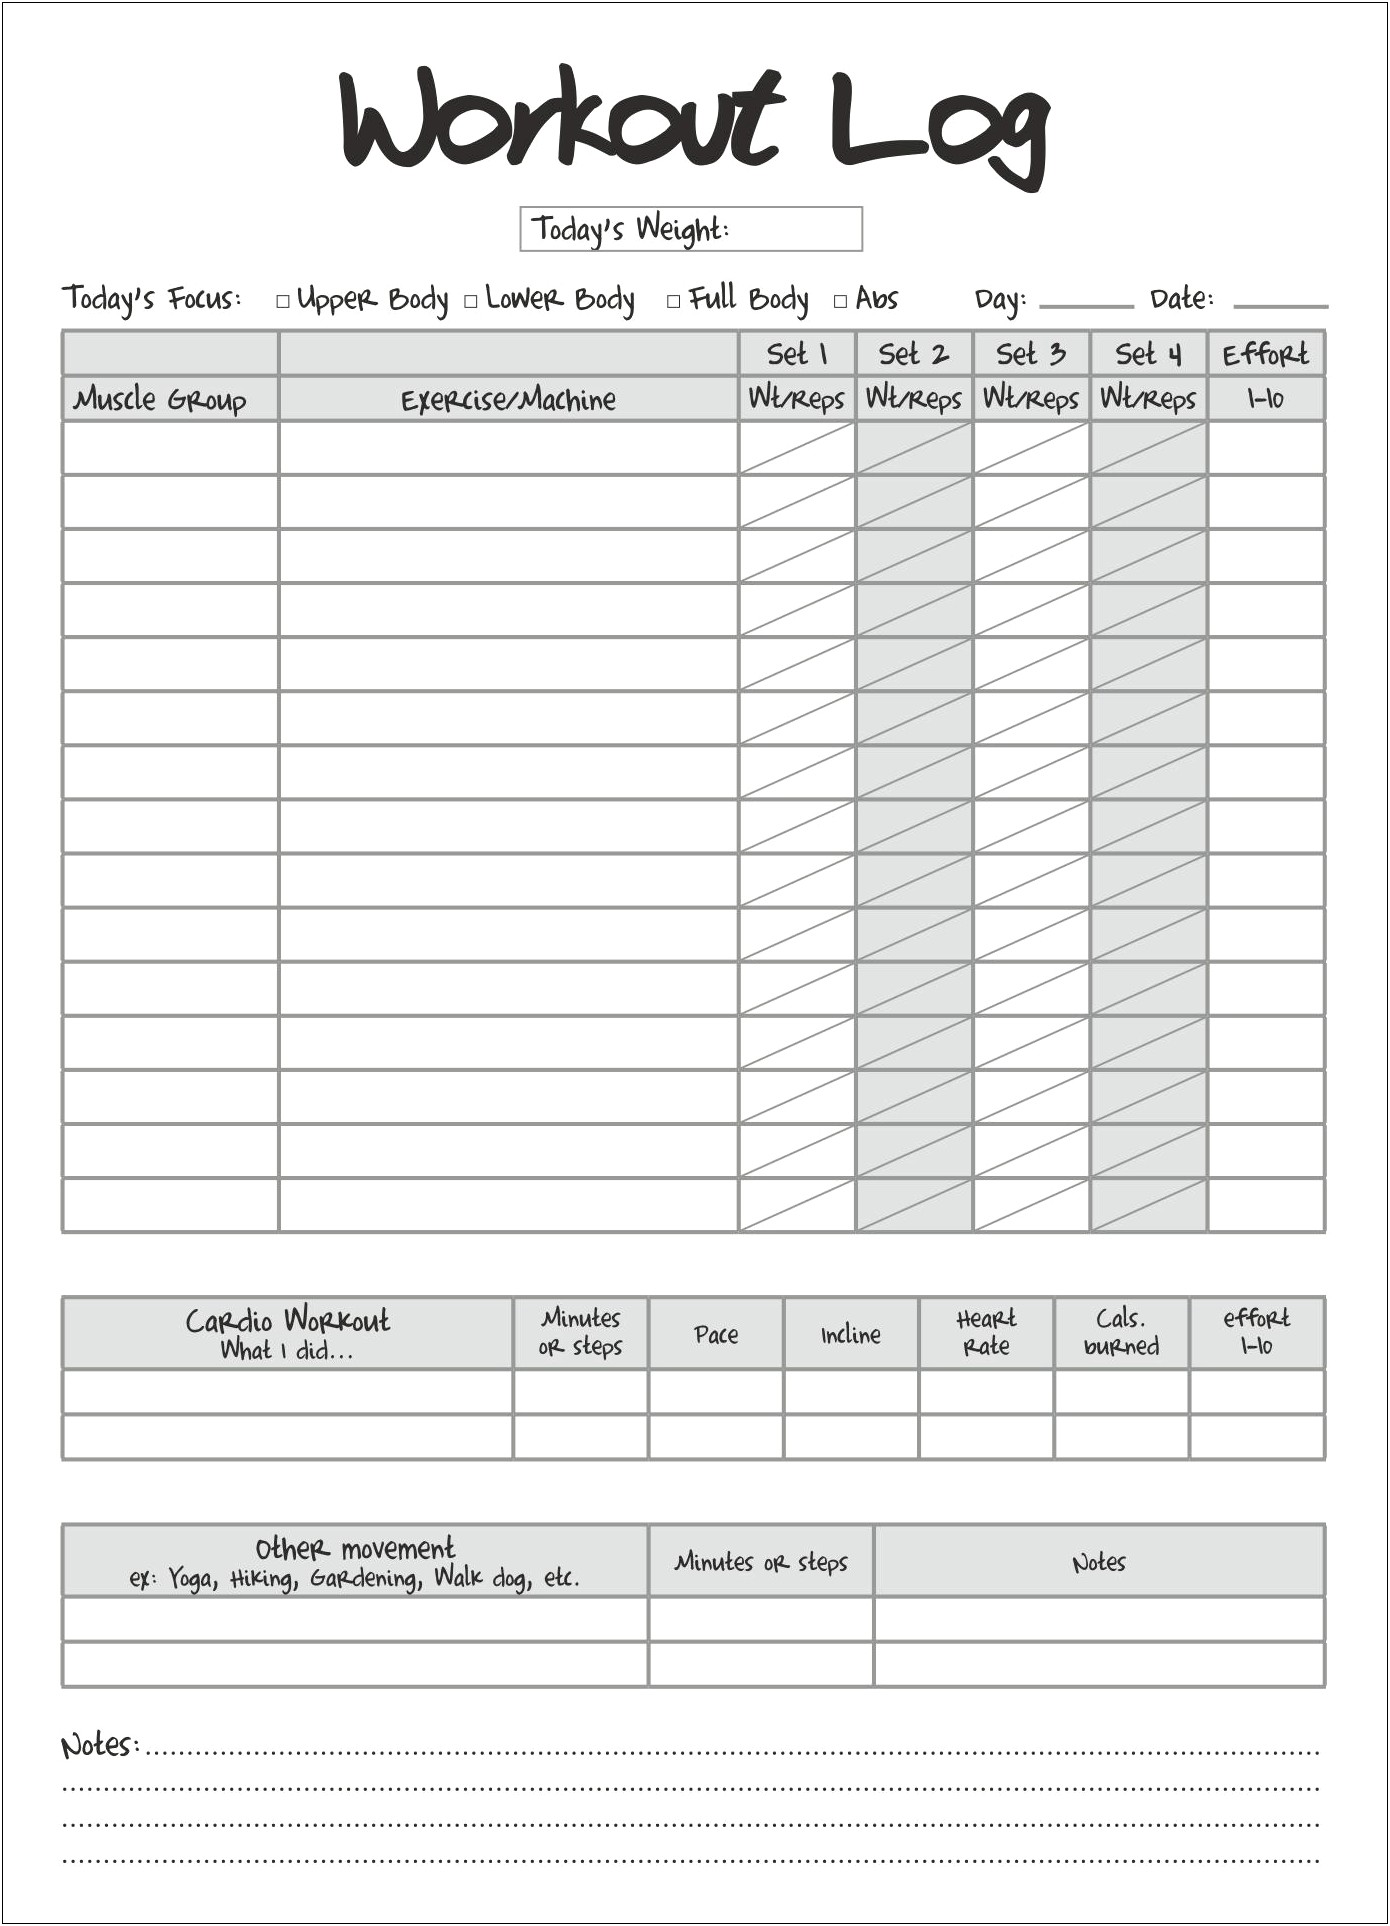 Free Workout Log Template That's Printable & Easy